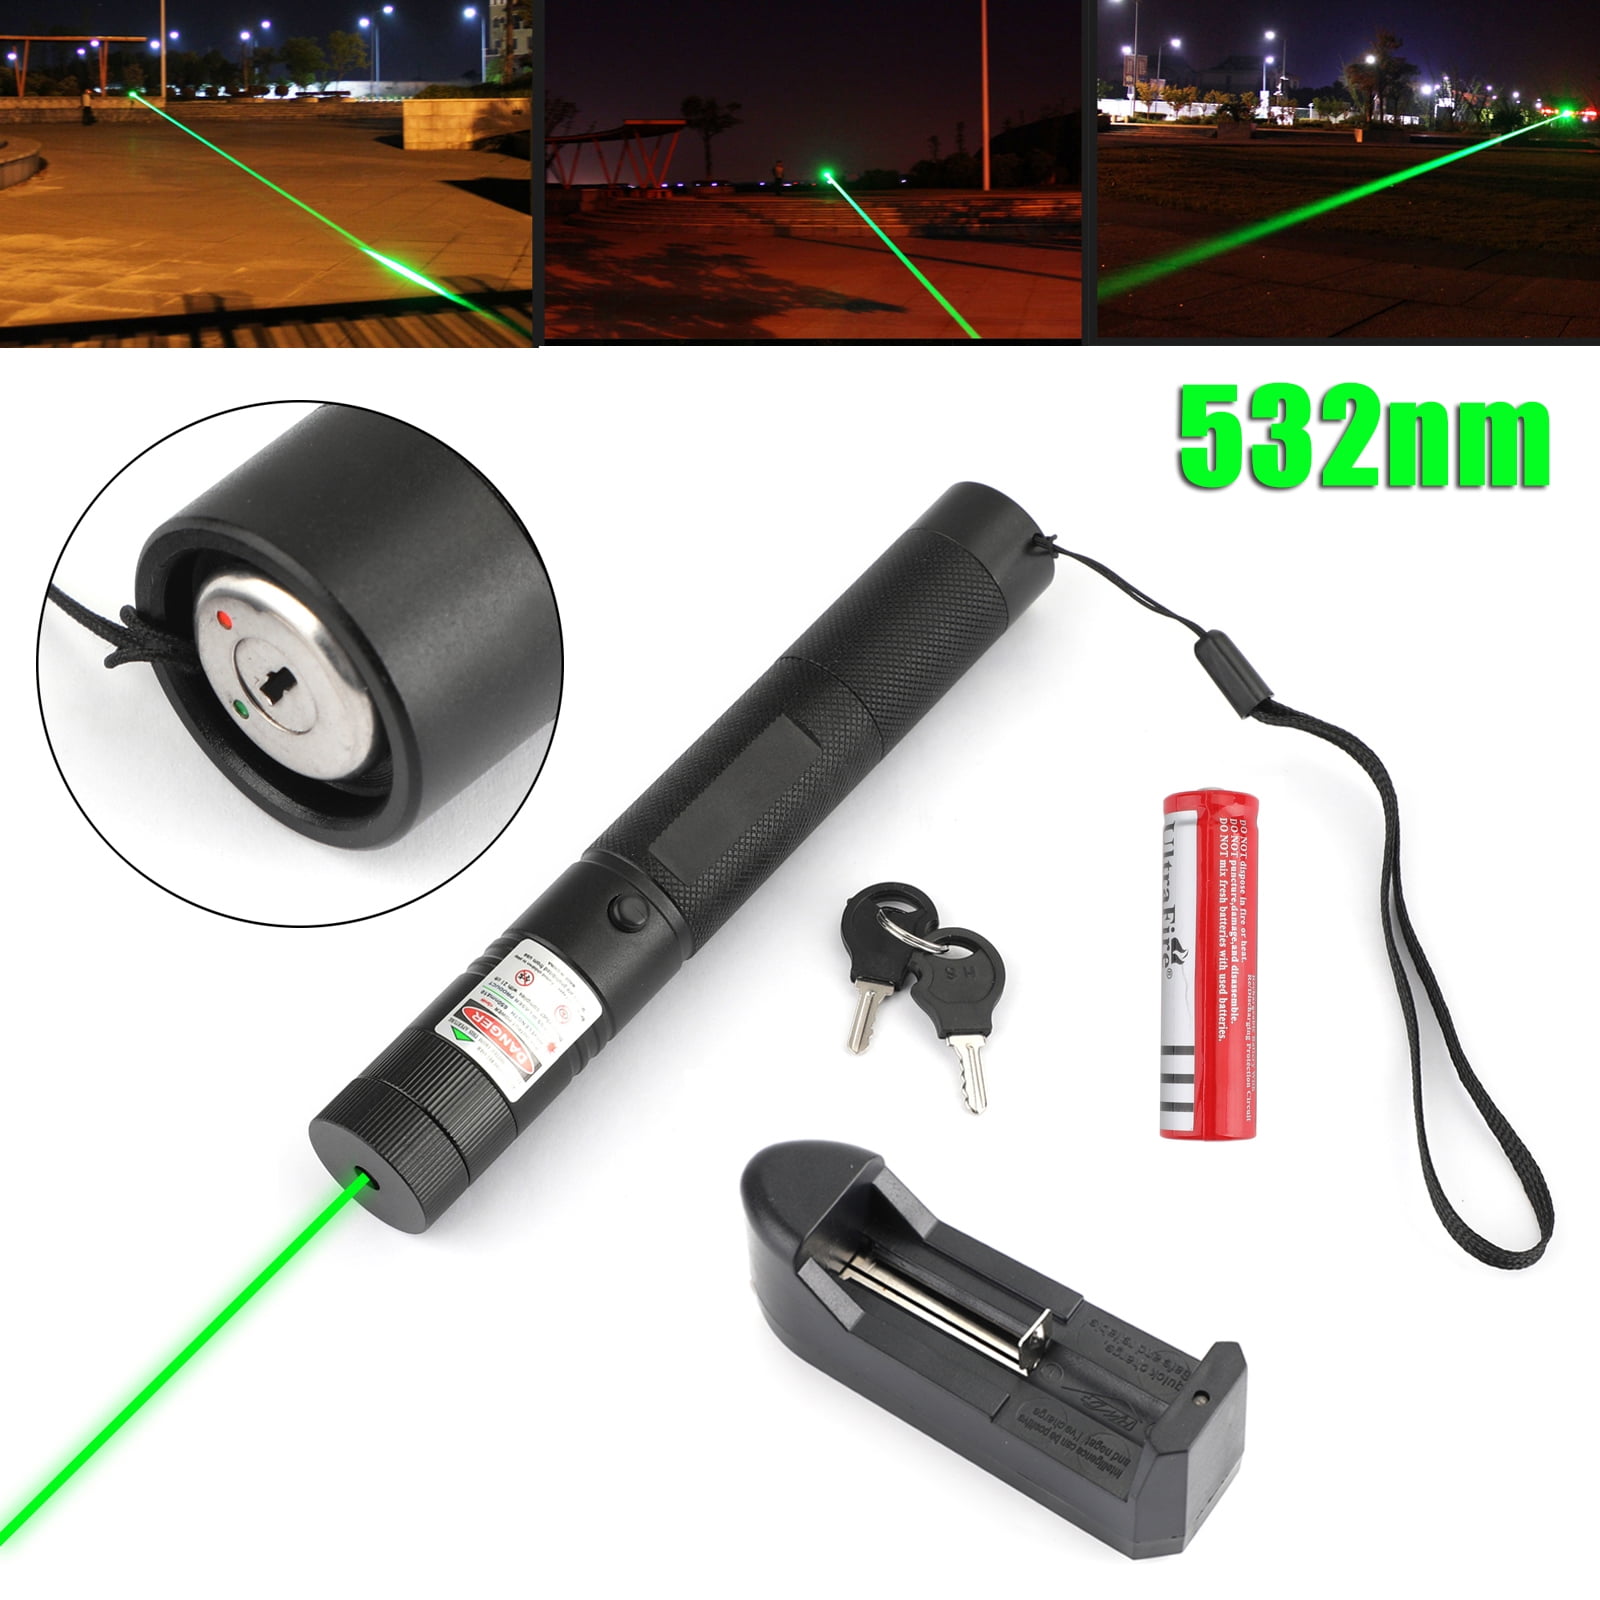 USB Rechargeable 1mW Green Laser Pointer Pen Visible Beam Light Lazer 1000M 